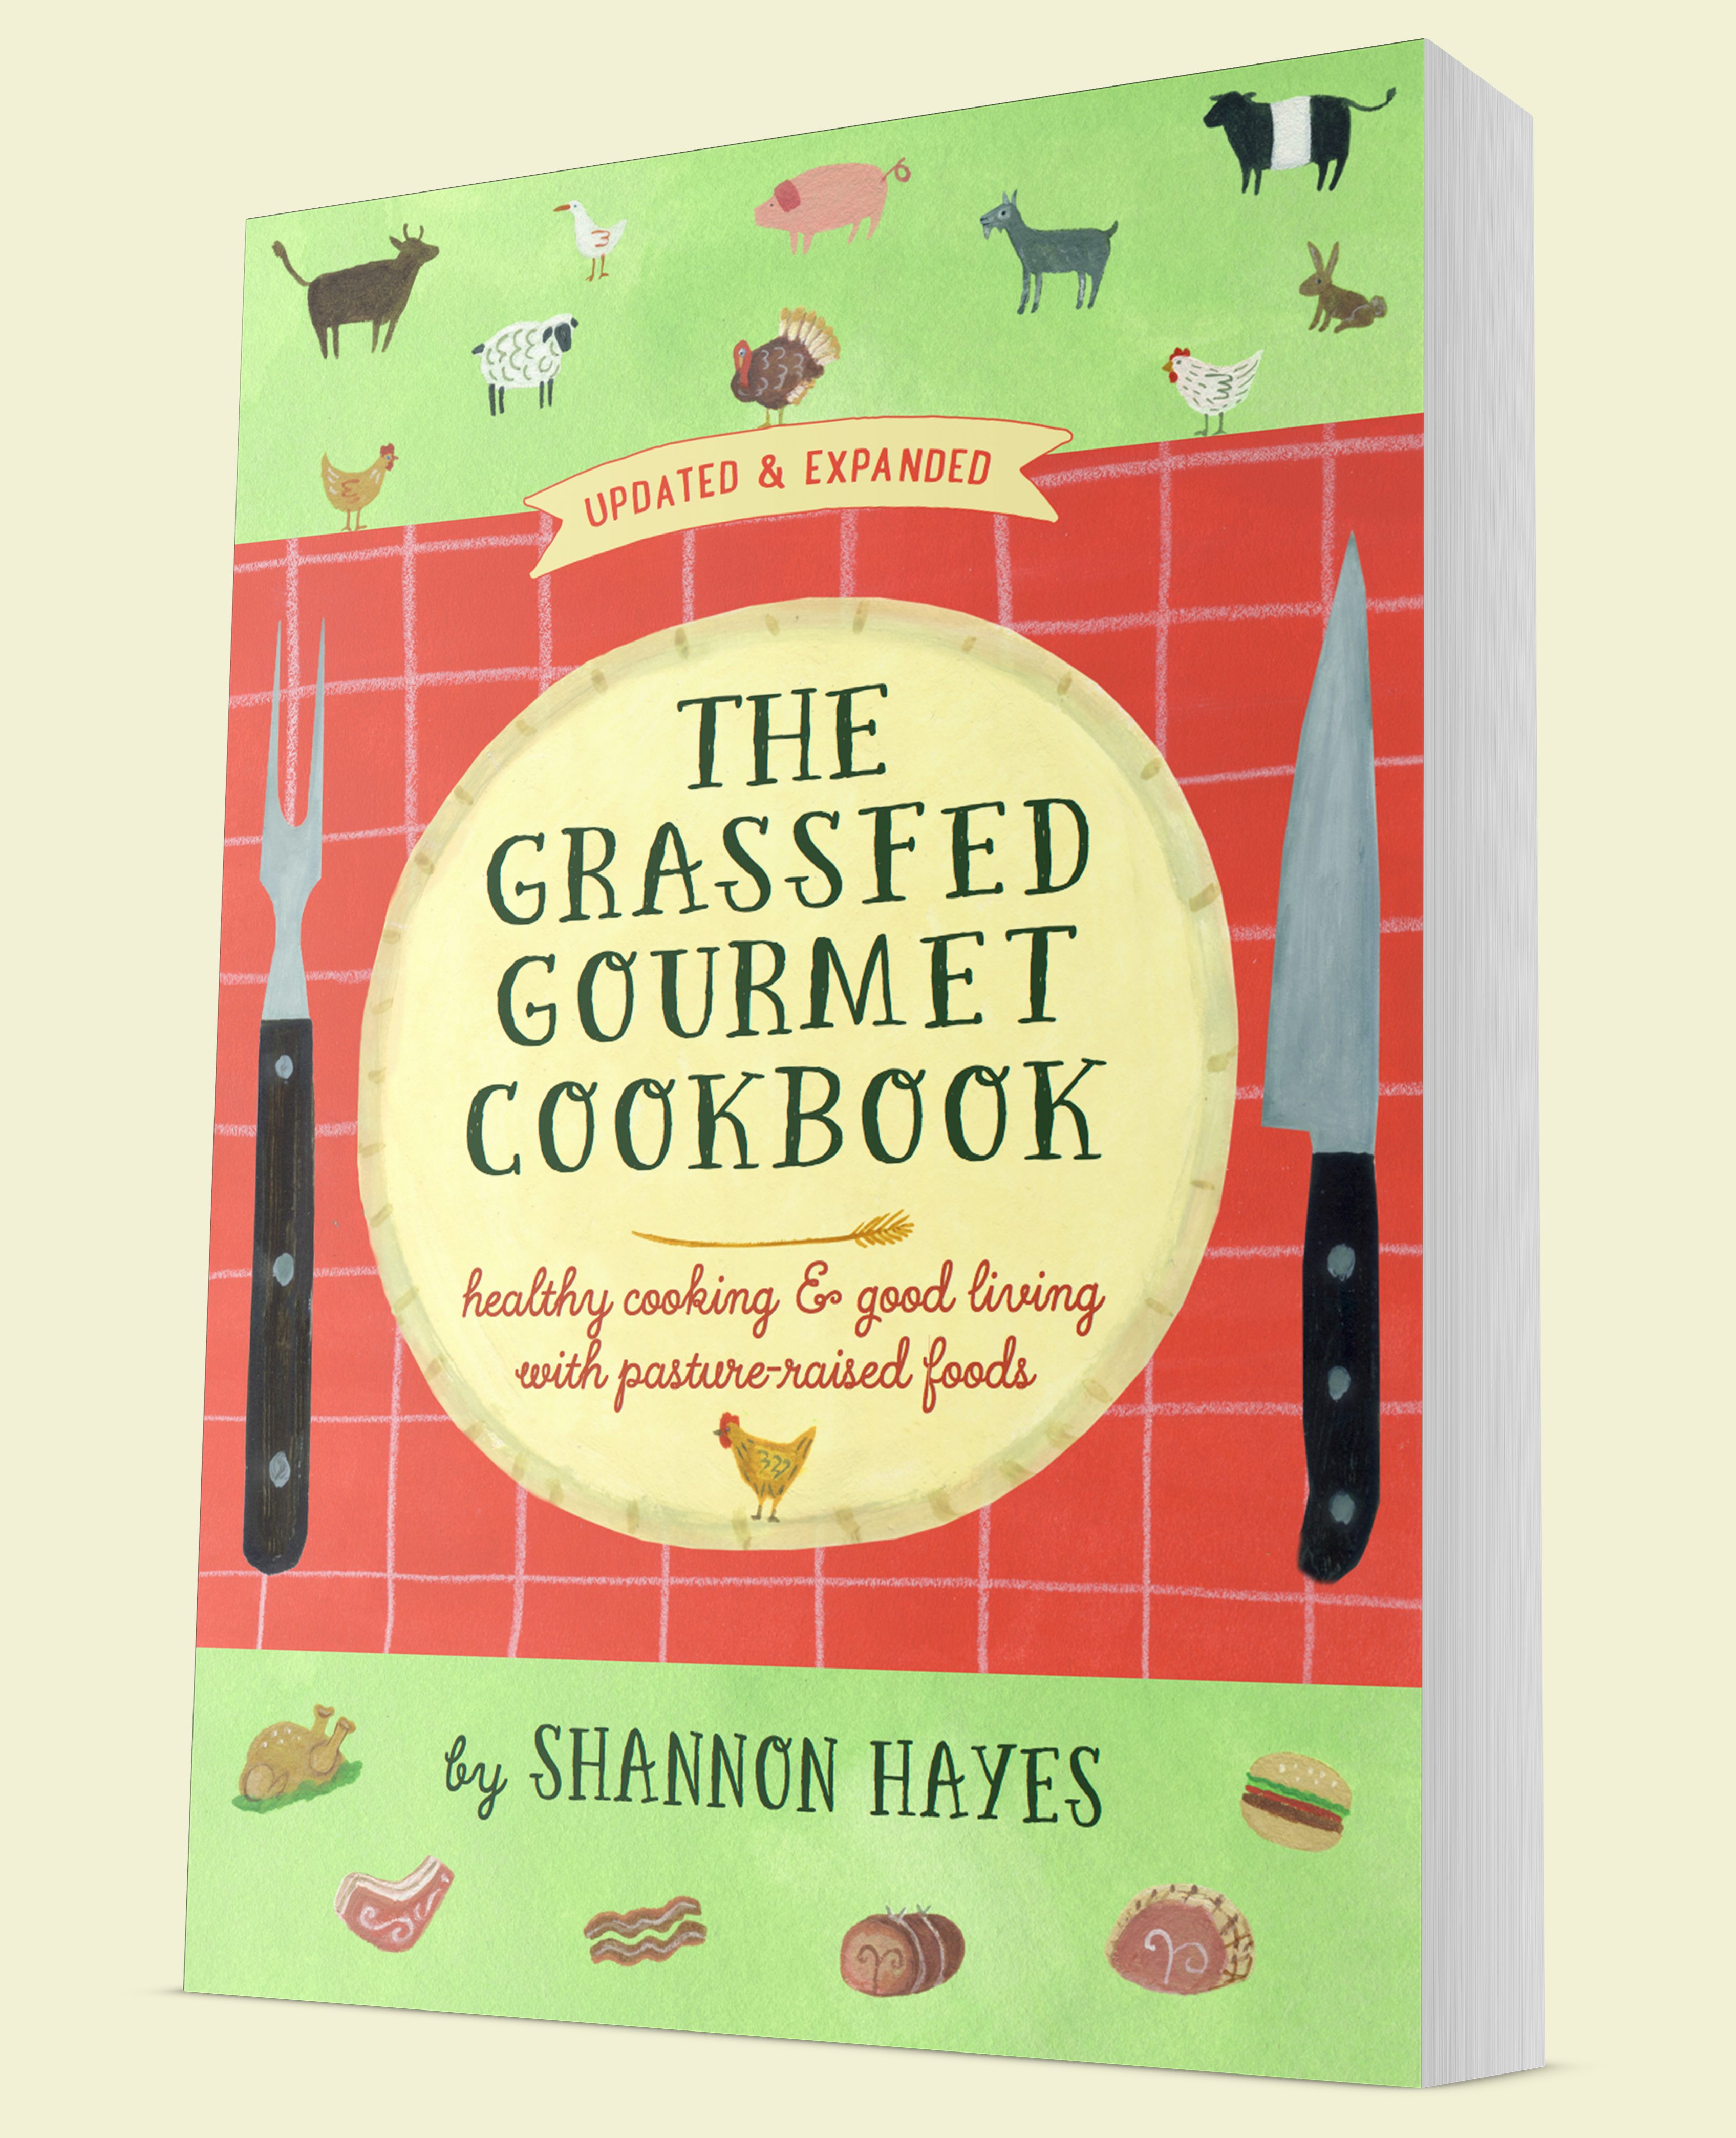 The Grassfed Gourmet Cookbook by Shannon Hayes